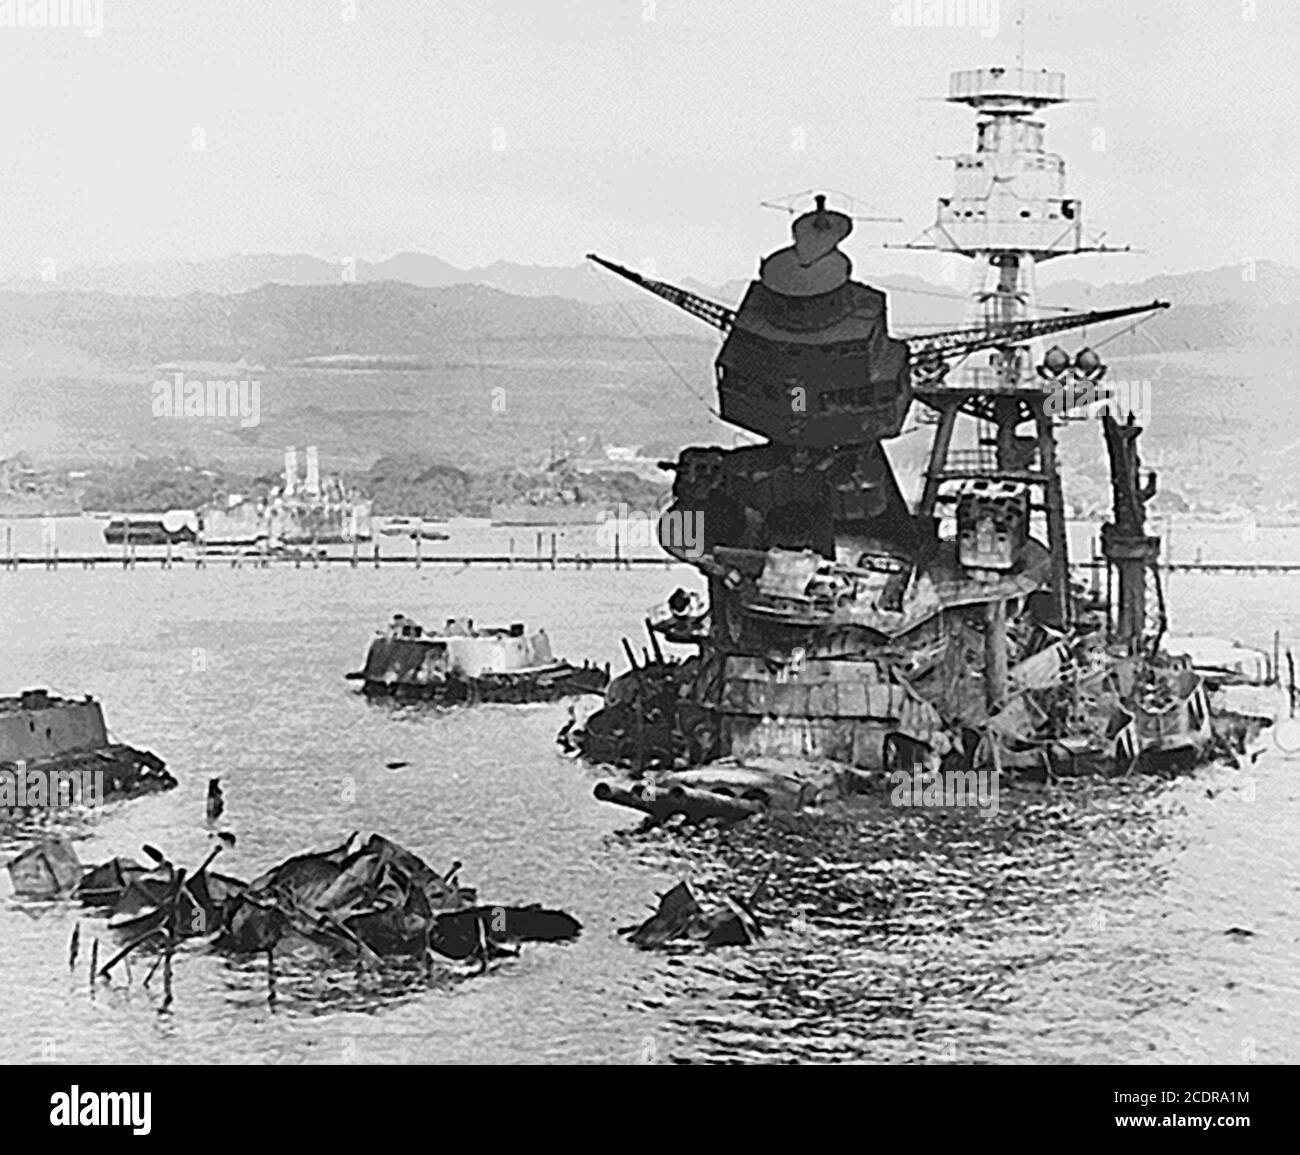 Pearl Harbor 1941. Photograph of the USS Arizona on December 10 1941 following the Japanese attack on Pearl Harbor on December 7, 1941. Stock Photo